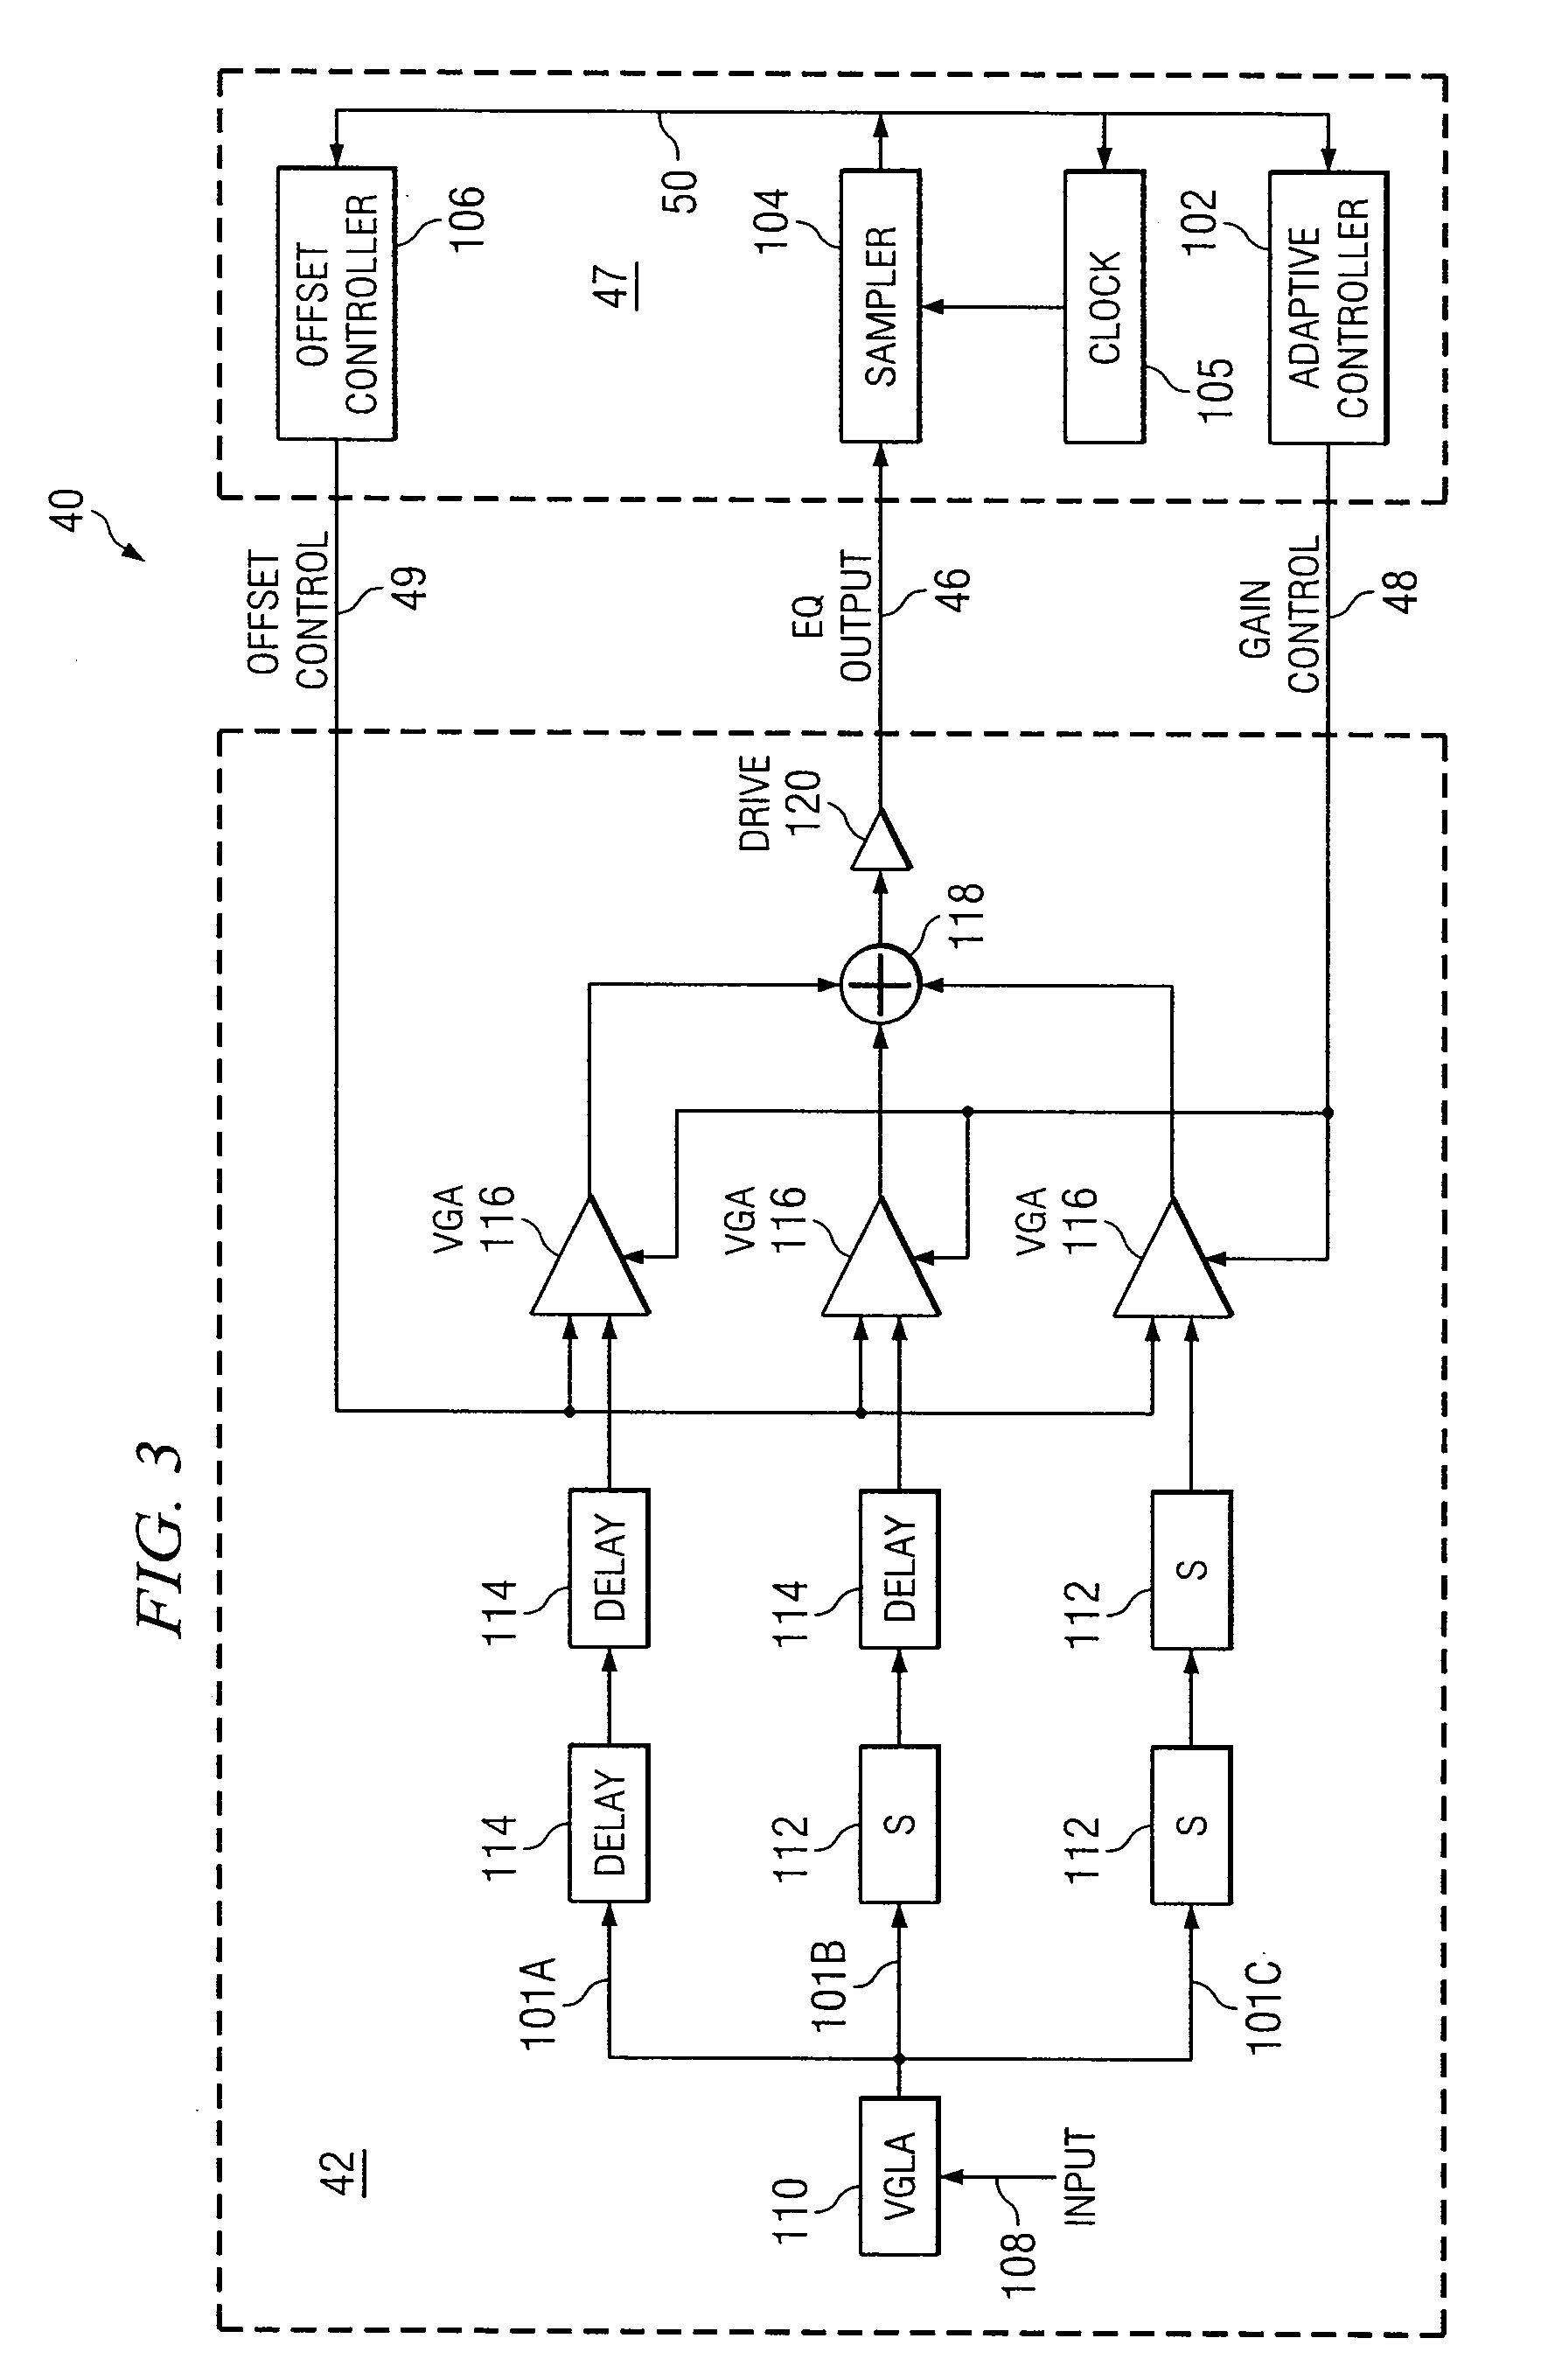 System and Method for the Non-Linear Adjustment of Compensation Applied to a Signal